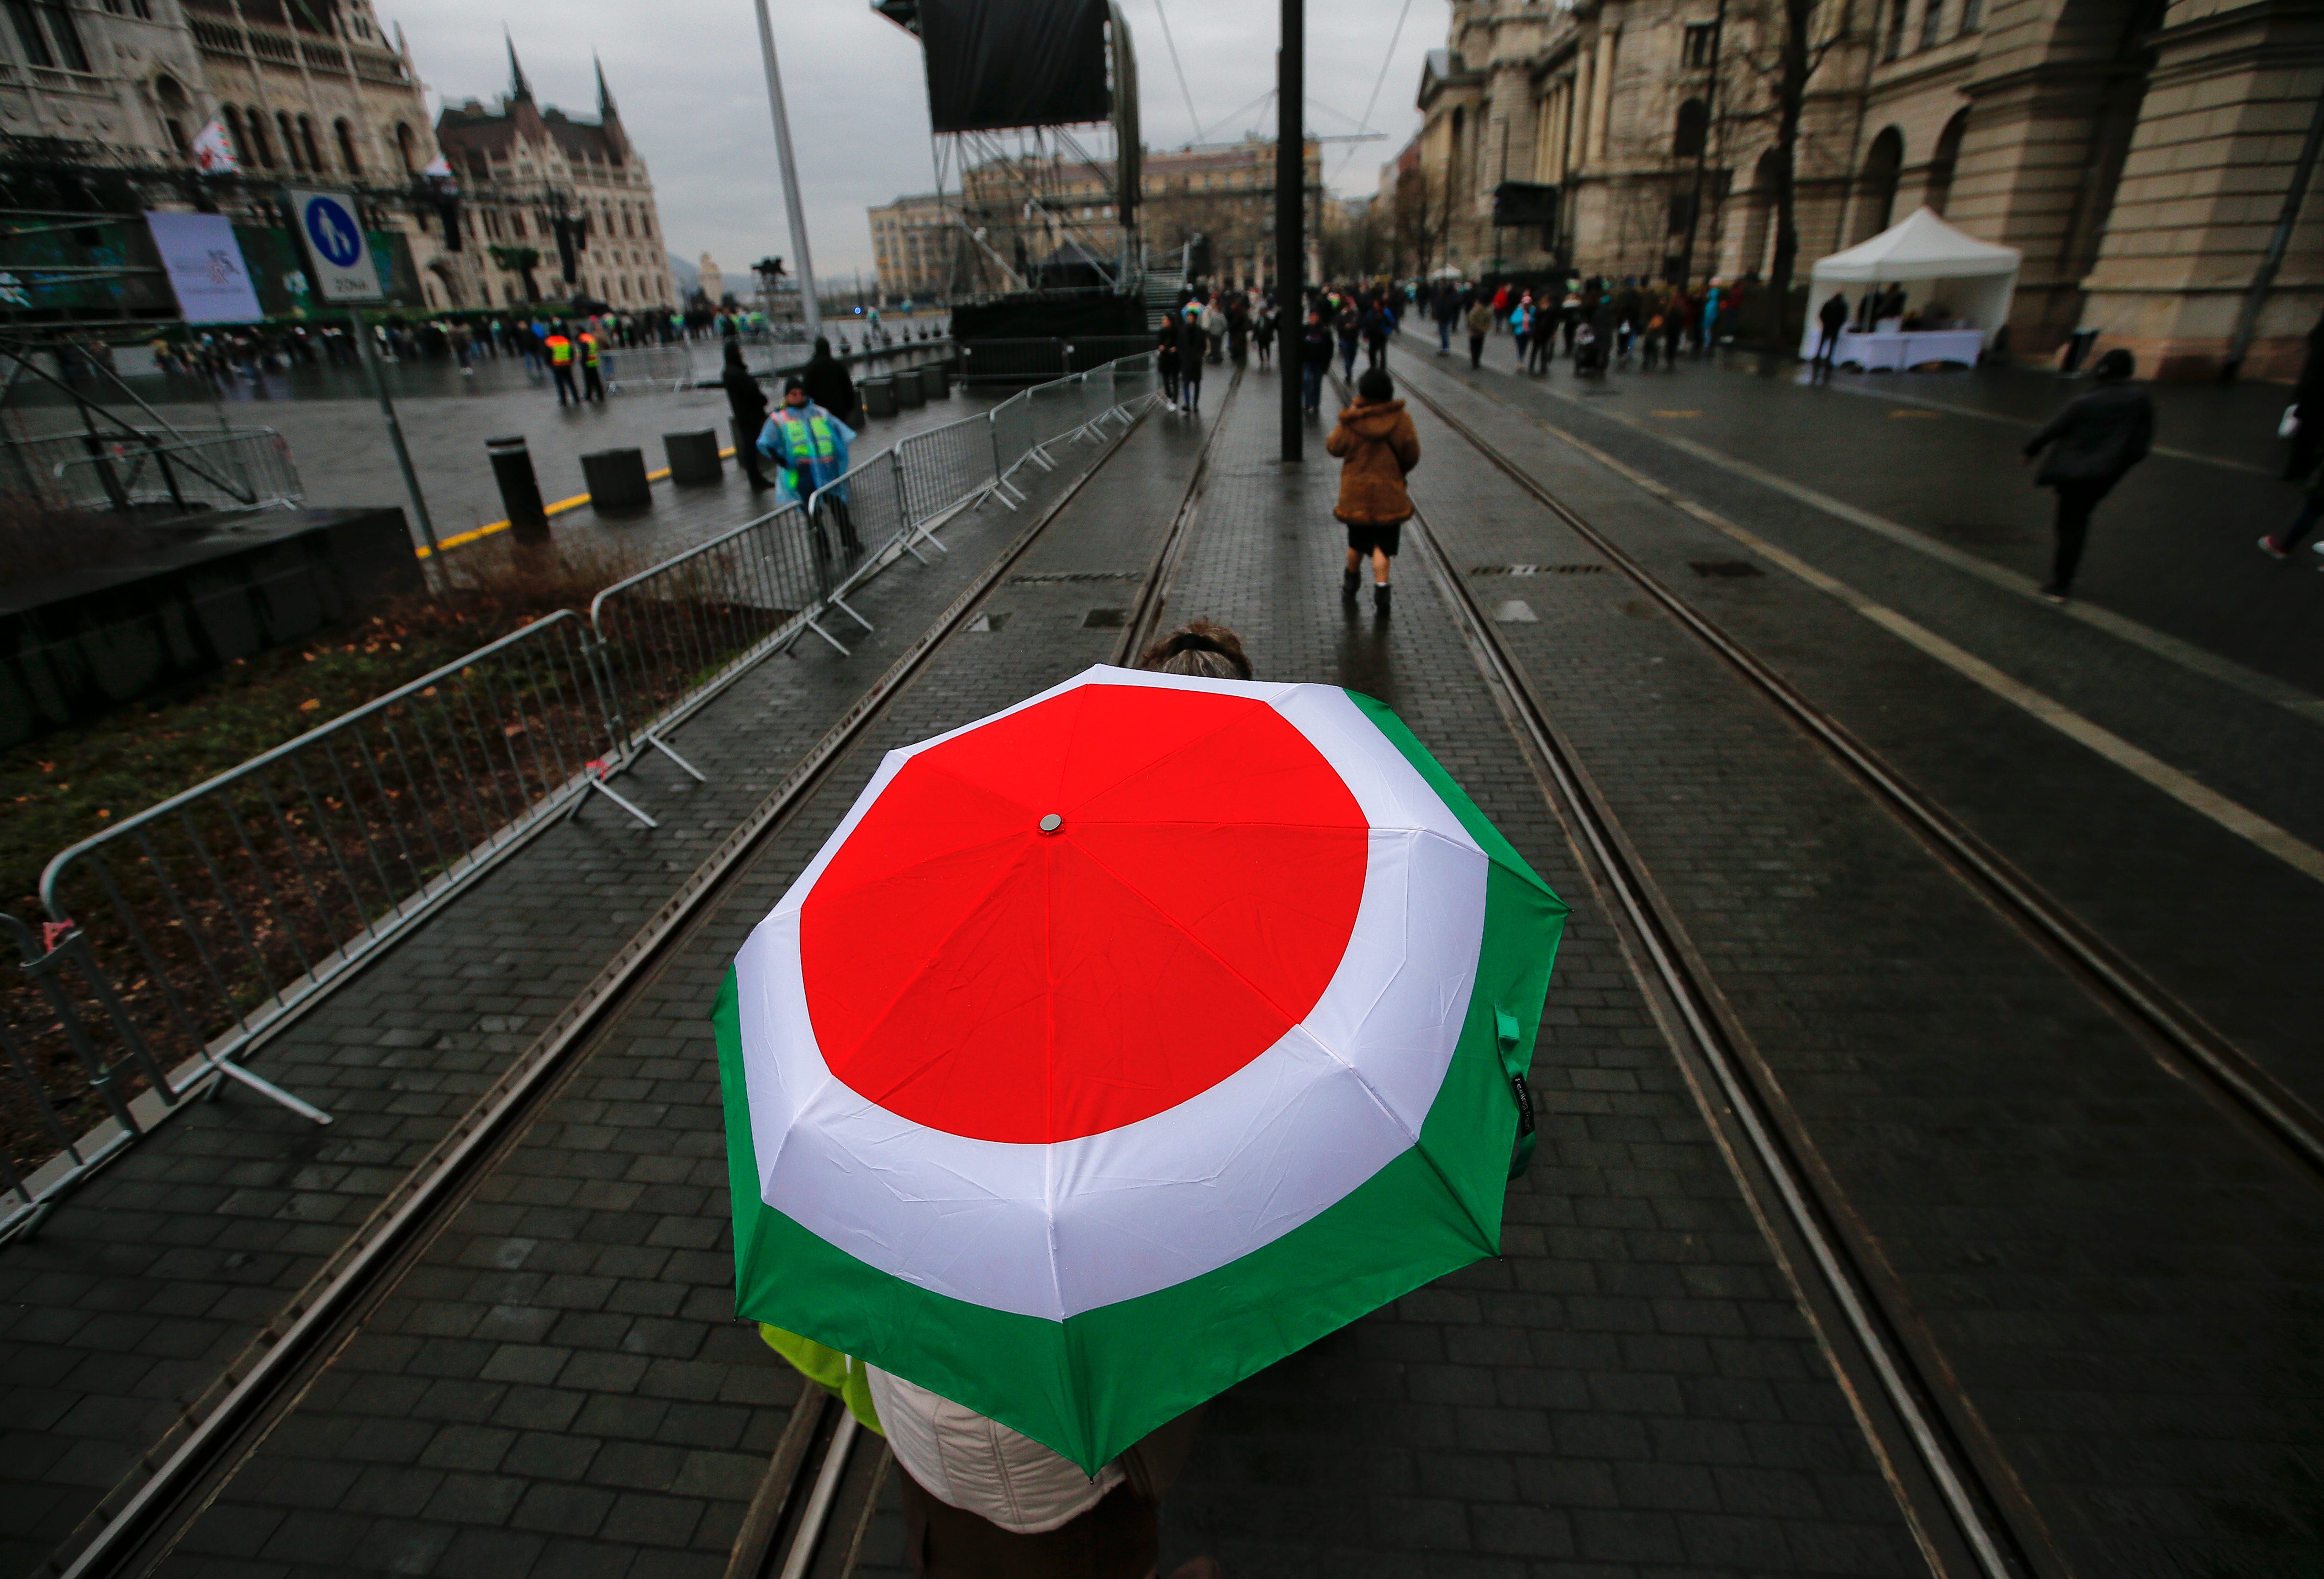 A supporter of Hungarian Prime Minister Viktor Orban walks under an umbrella in Hungary's national flag colors outside the Parliament building in Budapest. Hungary is celebrating their national holiday, the 170th anniversary of the outbreak of the 18